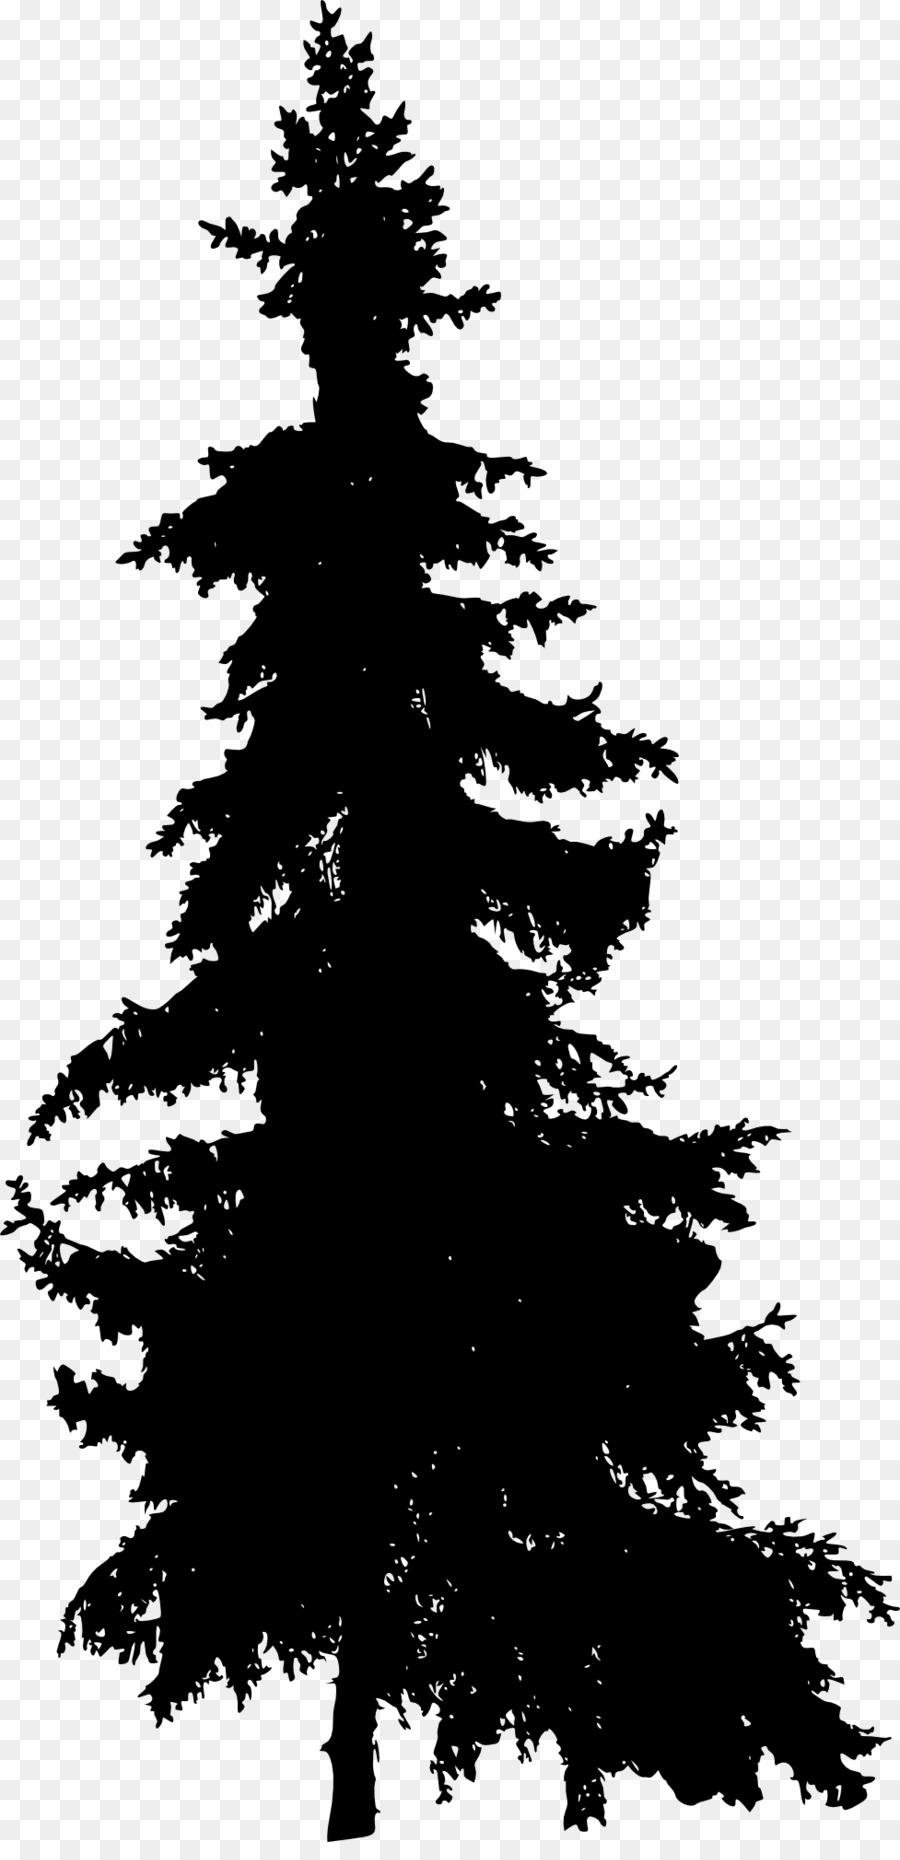 Free Pine Tree Silhouette Png, Download Free Pine Tree Silhouette Png png images, Free ClipArts